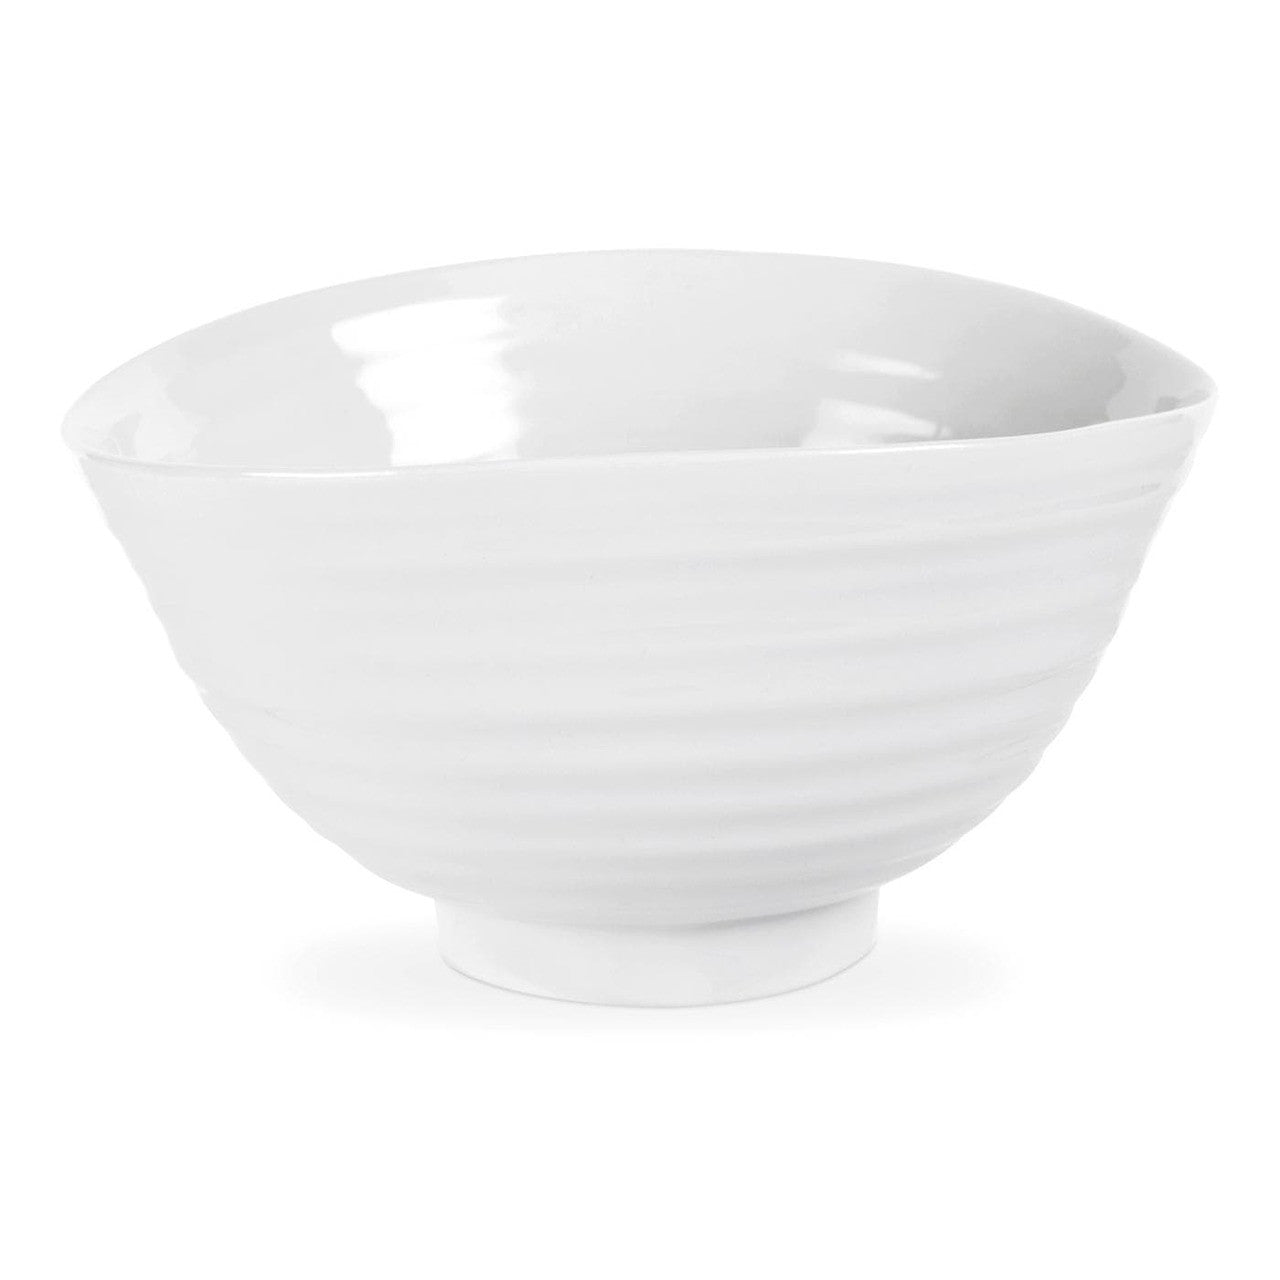 Portmeirion Sophie Conran Small Footed Bowl (Set of 4)